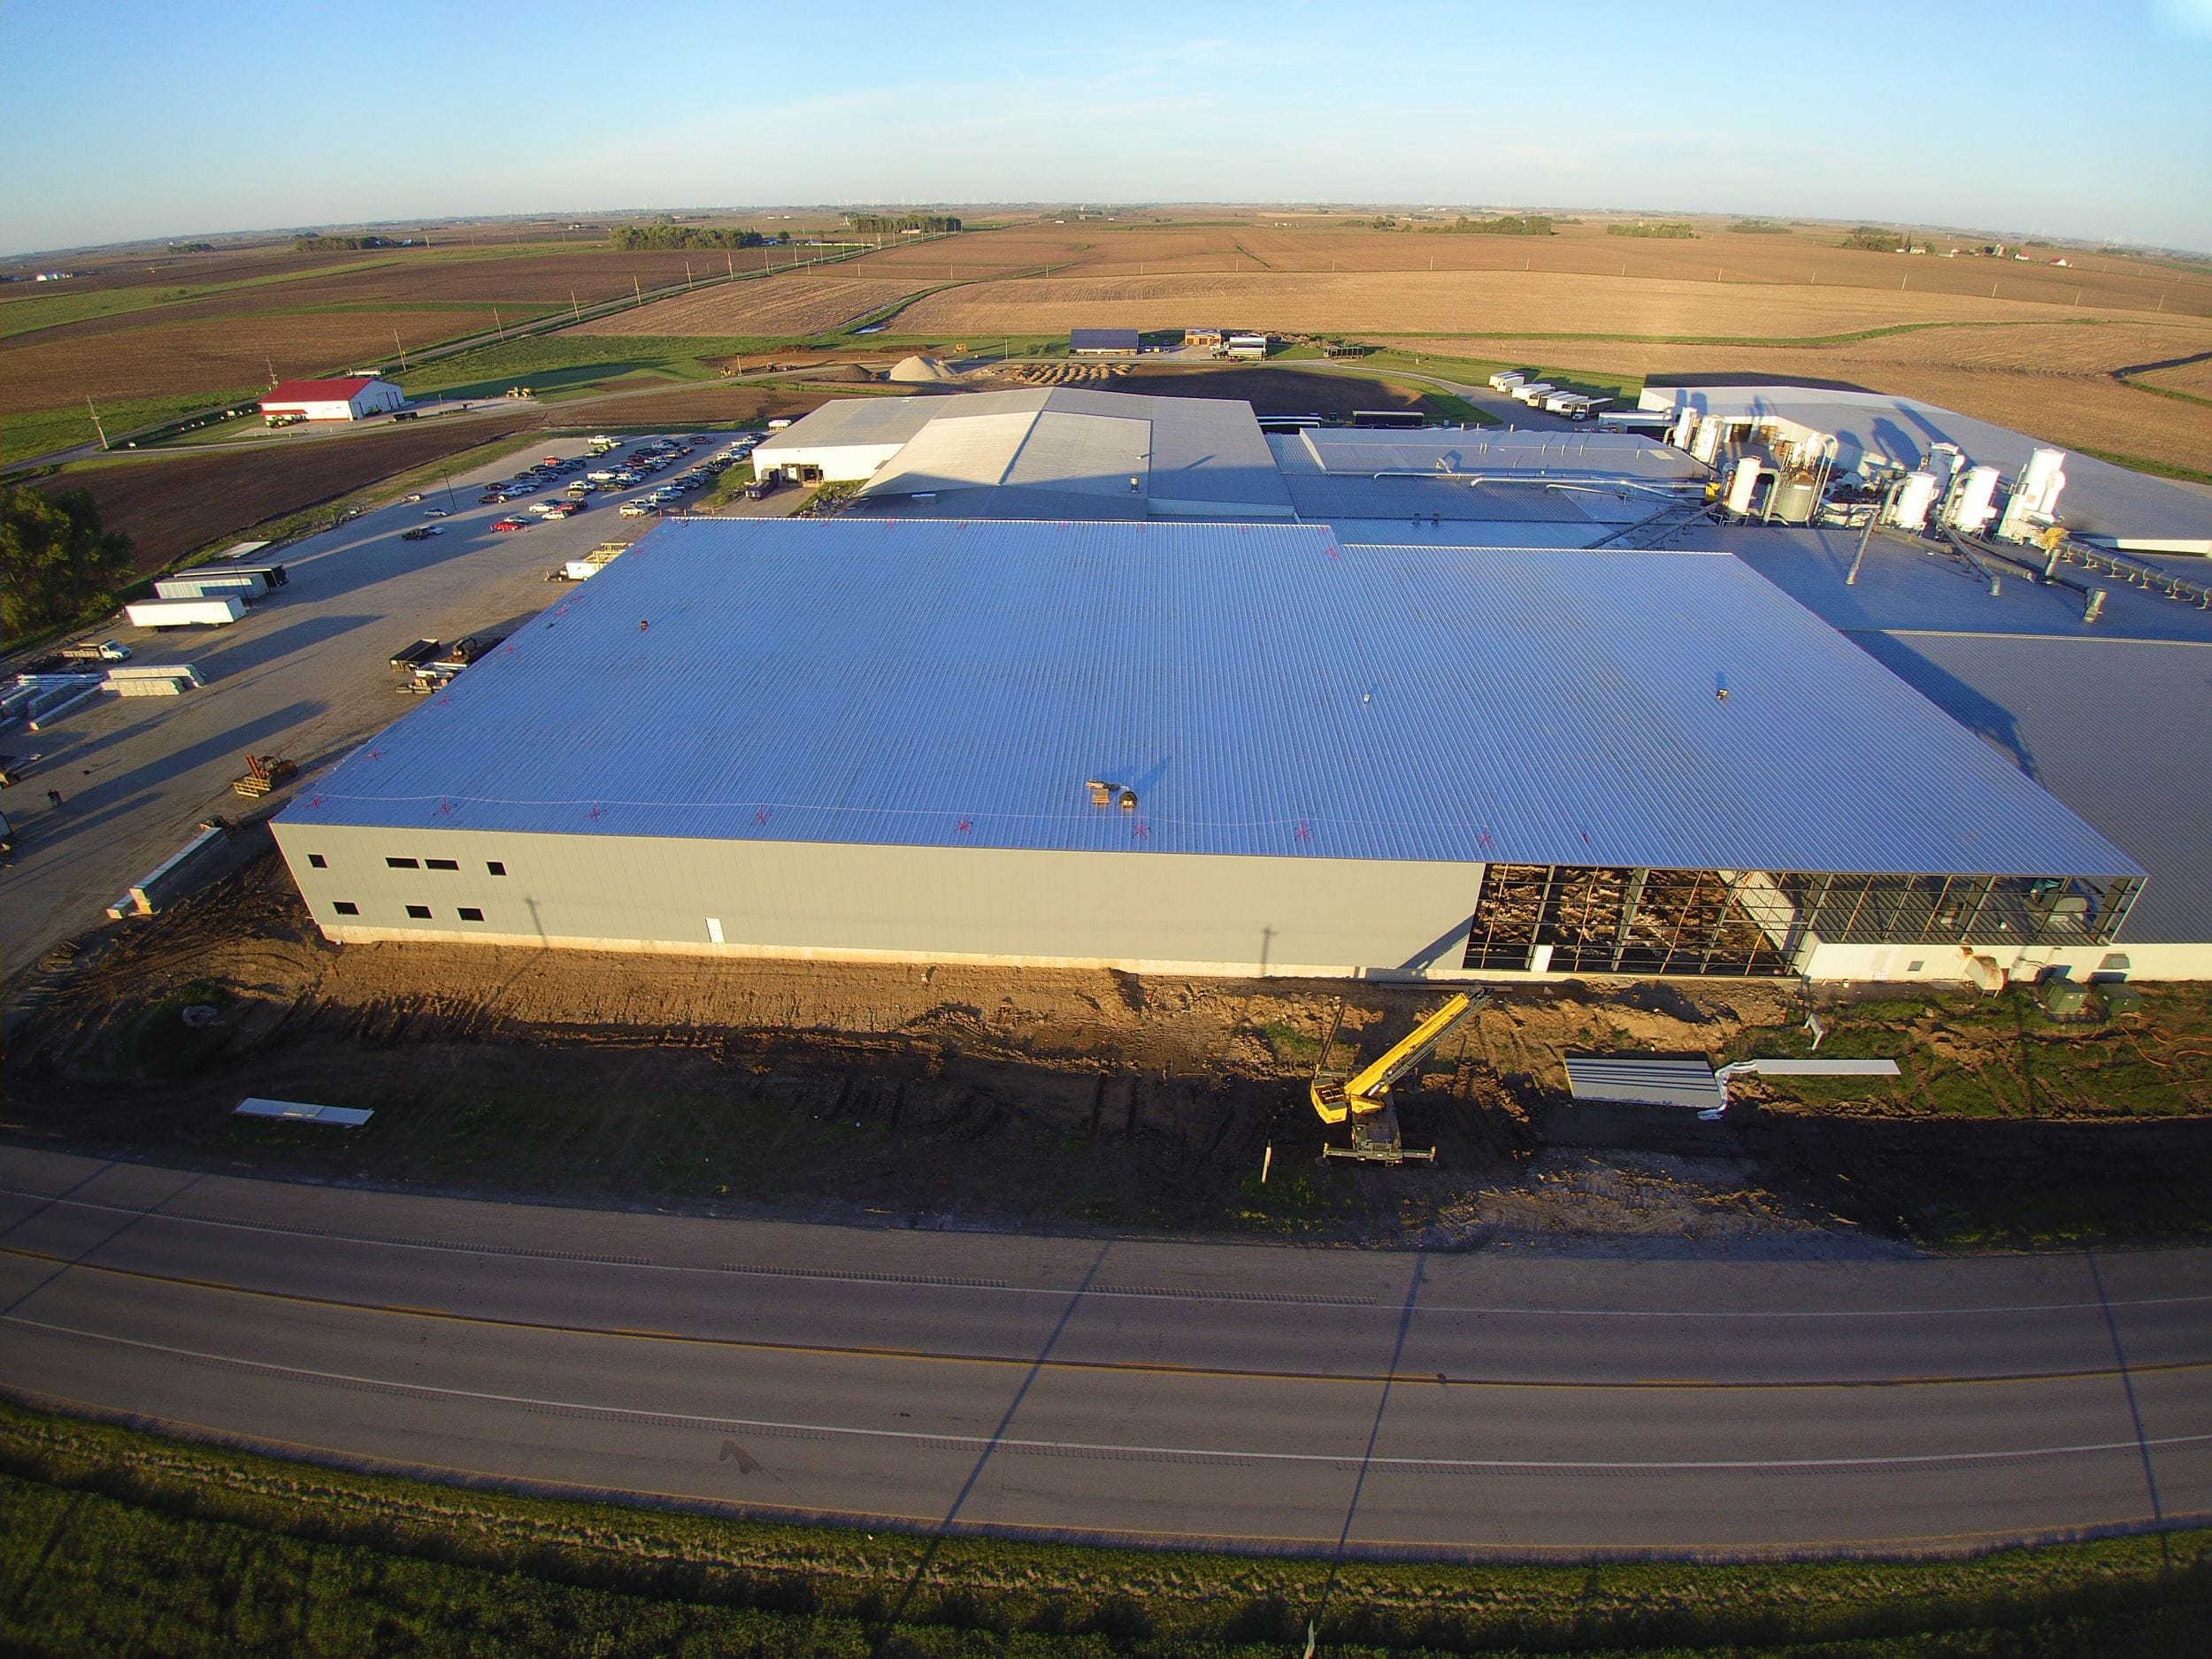 VT Industries Expands Holstein, Iowa Manufacturing Facility